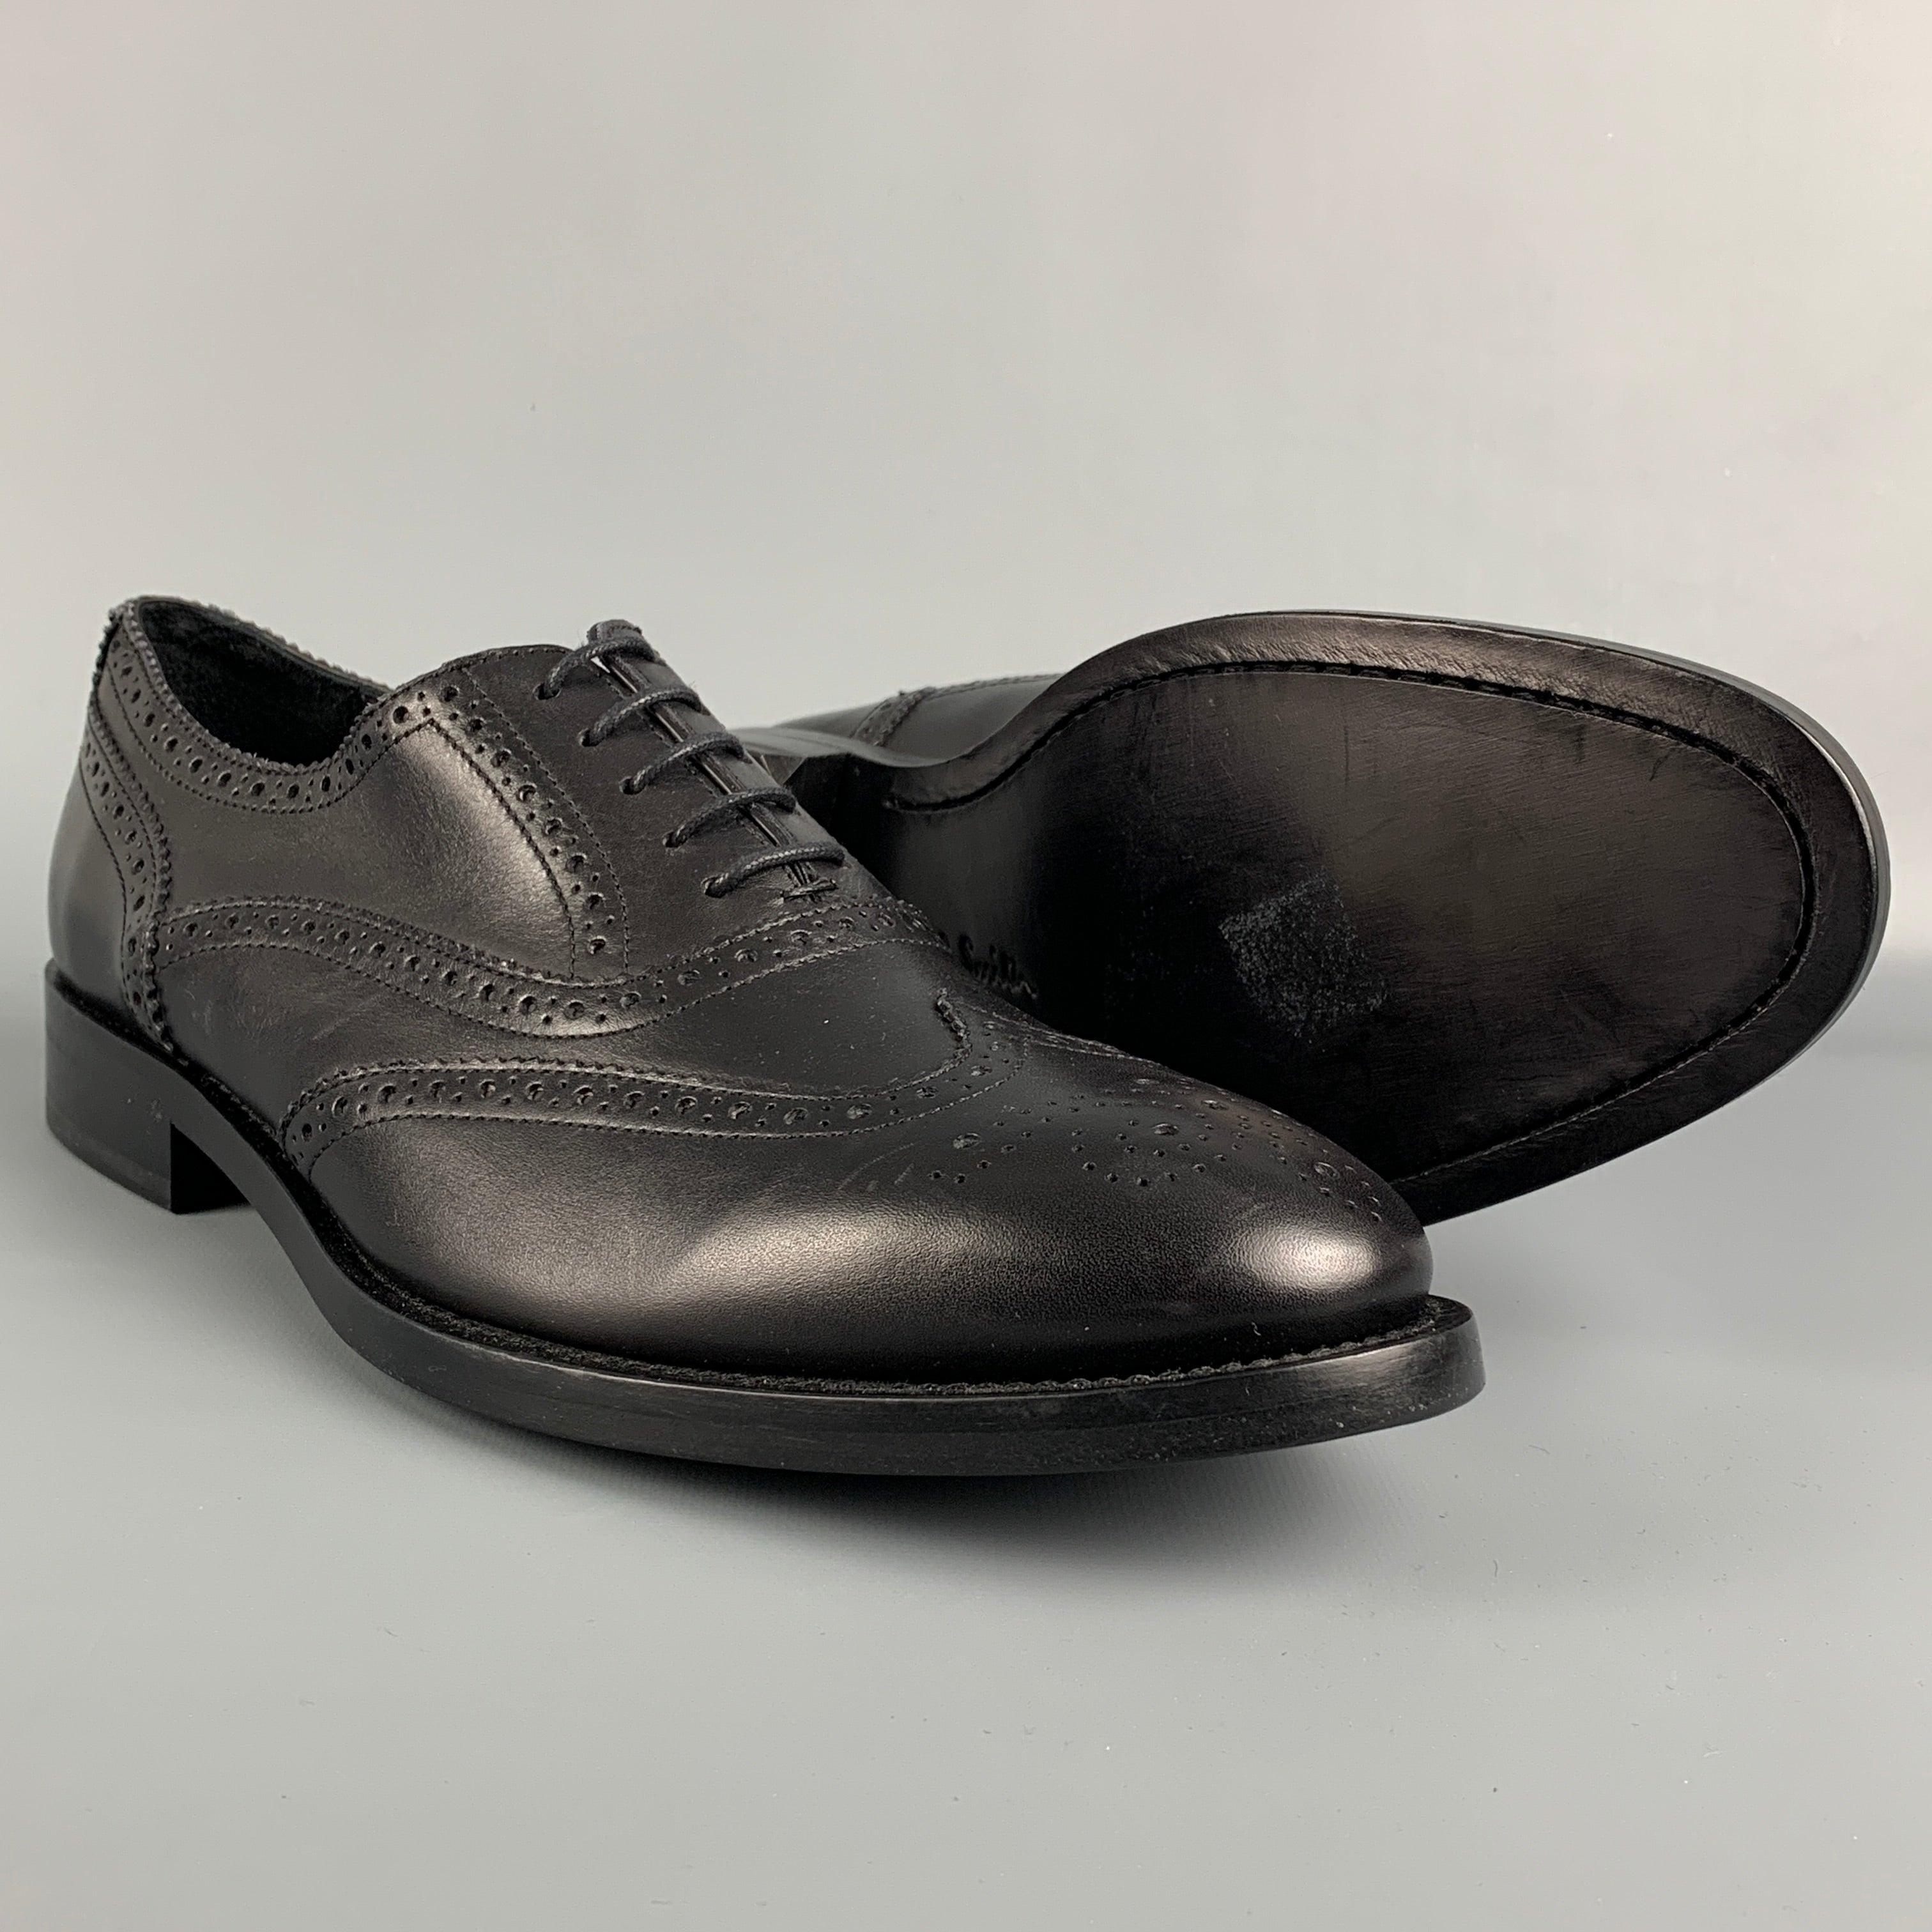 PAUL SMITH Size 9 Black Perforated Leather Wingtip Lace Up Shoes In Good Condition For Sale In San Francisco, CA